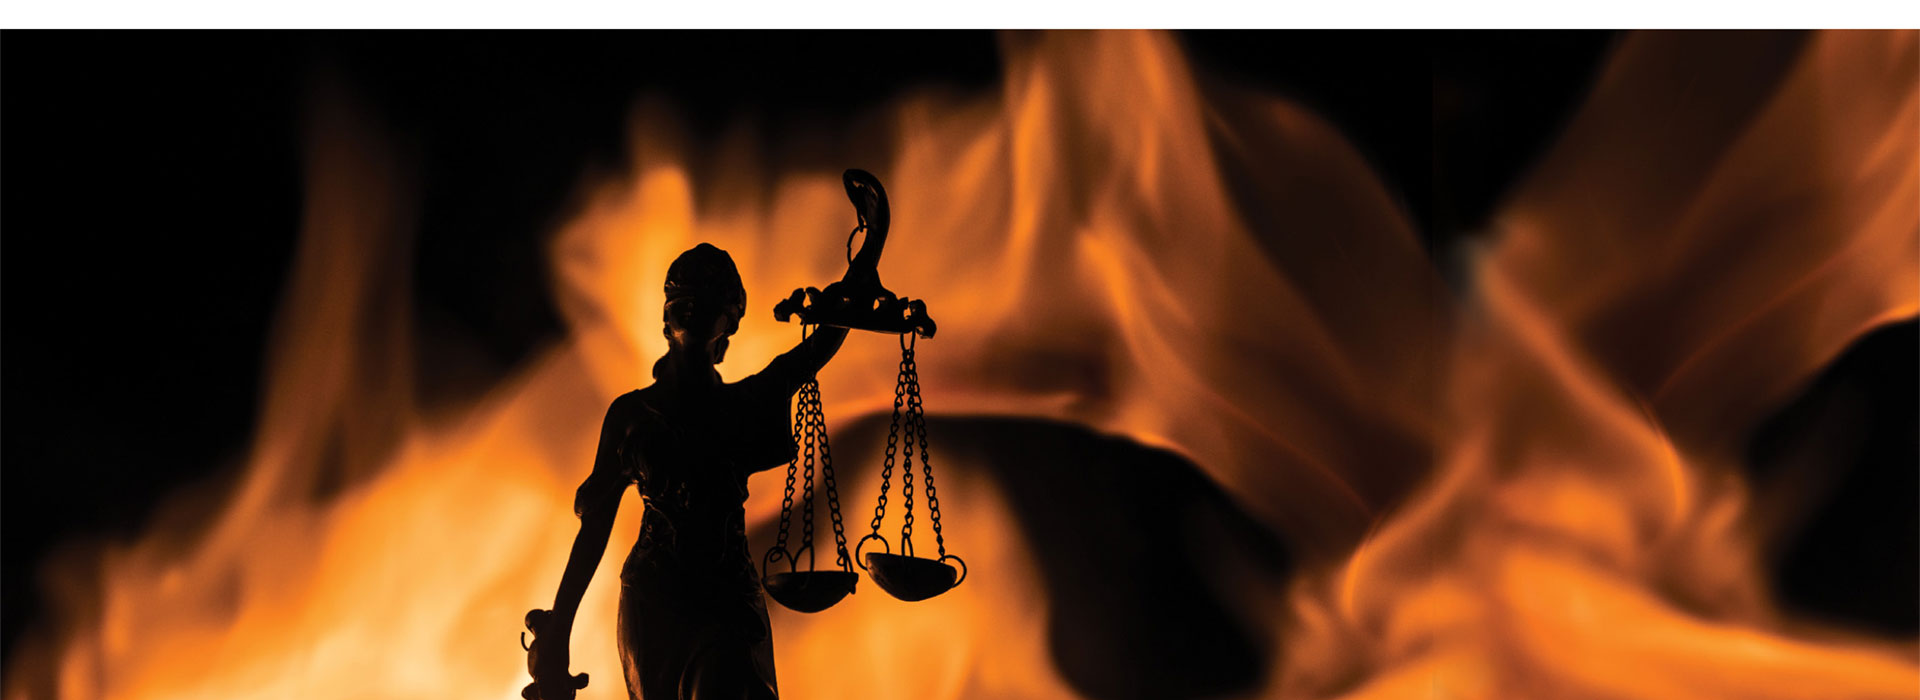 Lady Justice holding scales with a background that's on fire